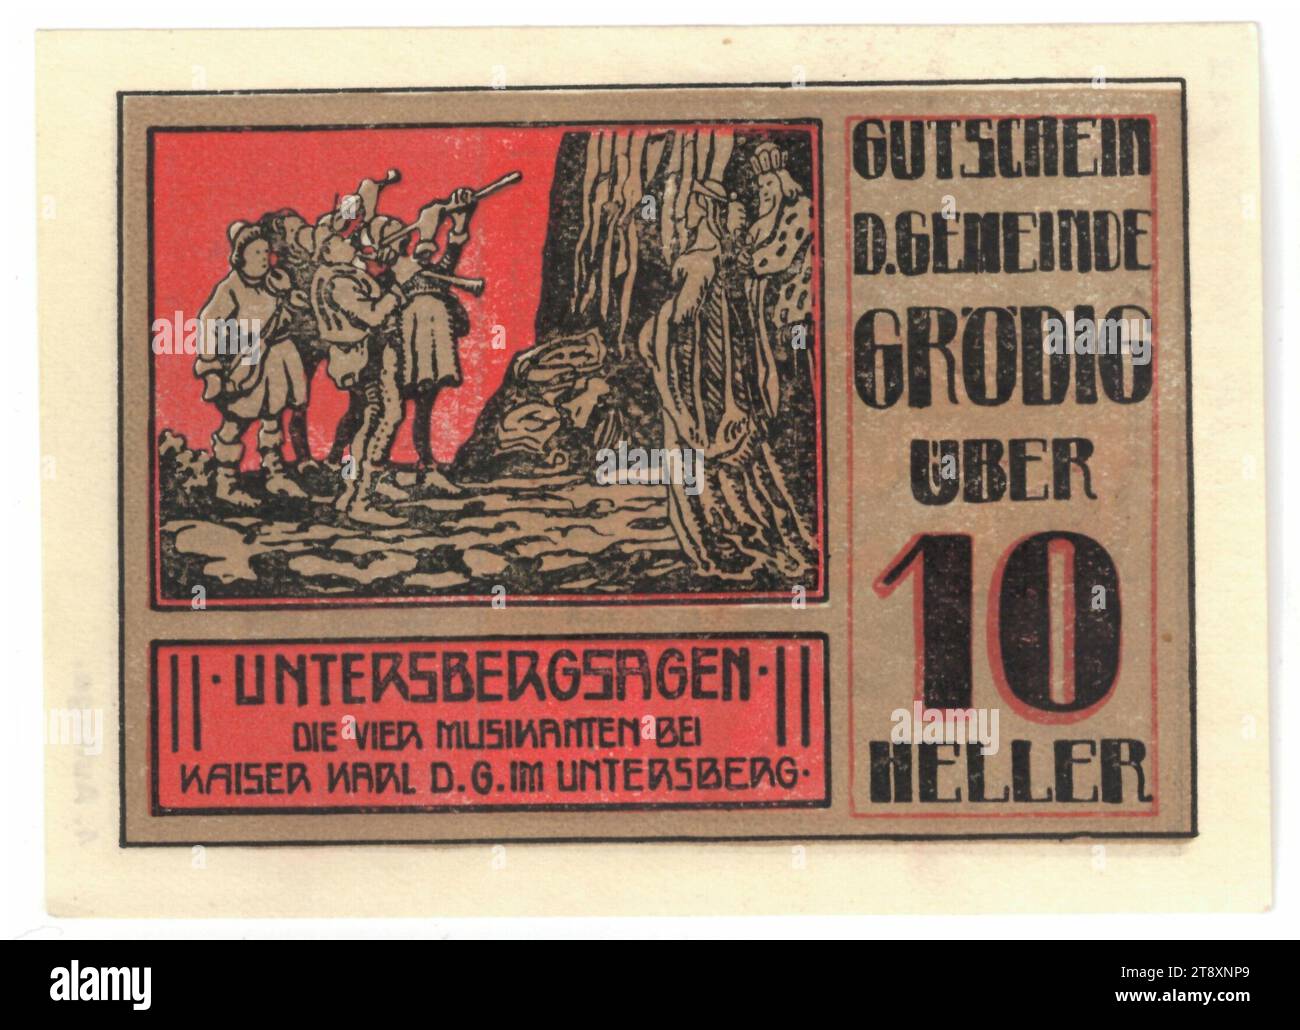 Voucher, 10 Heller, Municipality of Grödig (Salzburg), Mint Authority, Date before 12, 31, 1920, Paper, Printing, Height 65 mm, Width 89 mm, Mint Area, Austria, 1st Republic (1918-1933), Finance, Trading Stamp, Private Coin, Playing Music; Musician with Instrument, The Vienna Collection Stock Photo